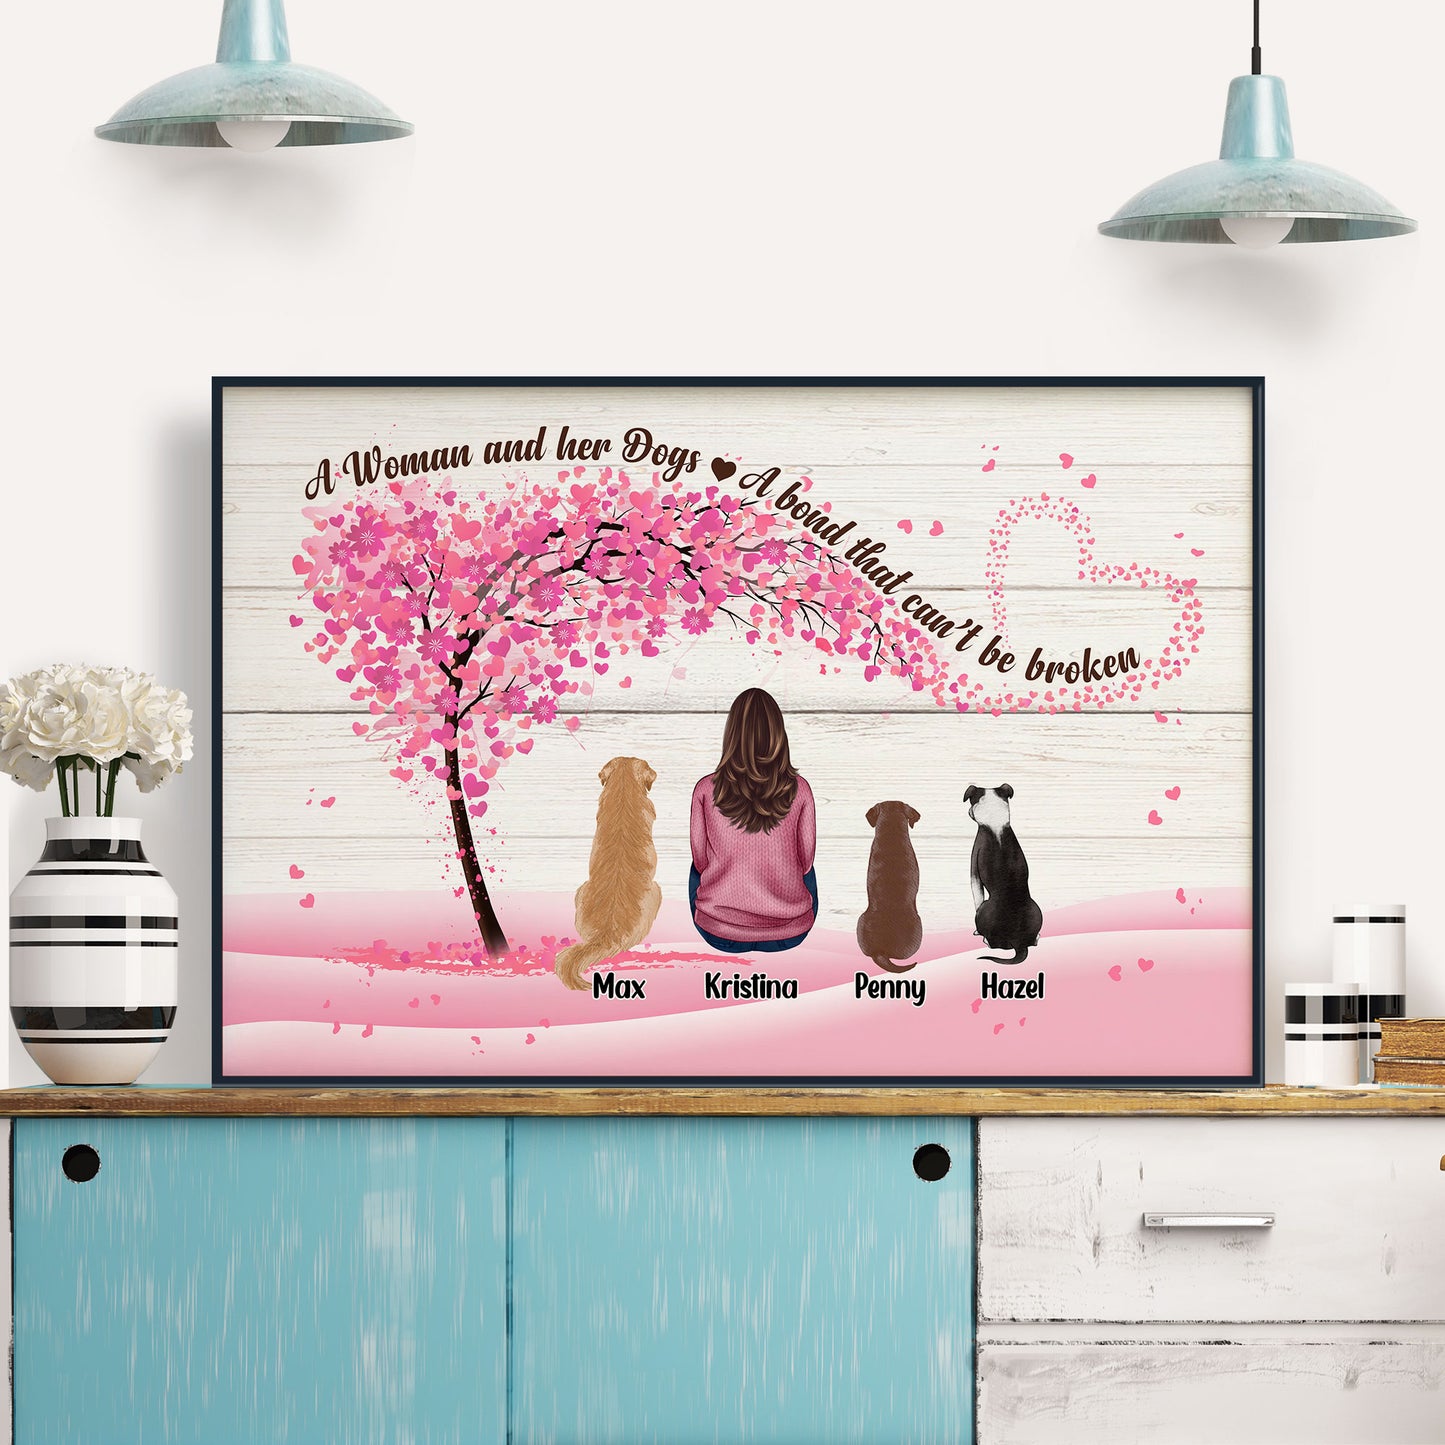 Girl And Her Pets - A Bond That Can Be Broken - Personalized Poster/Wrapped Canvas - Birthday Gift For Dog Lover, Cat Lover, Dog Owner, Cat Owner, Pet Lover